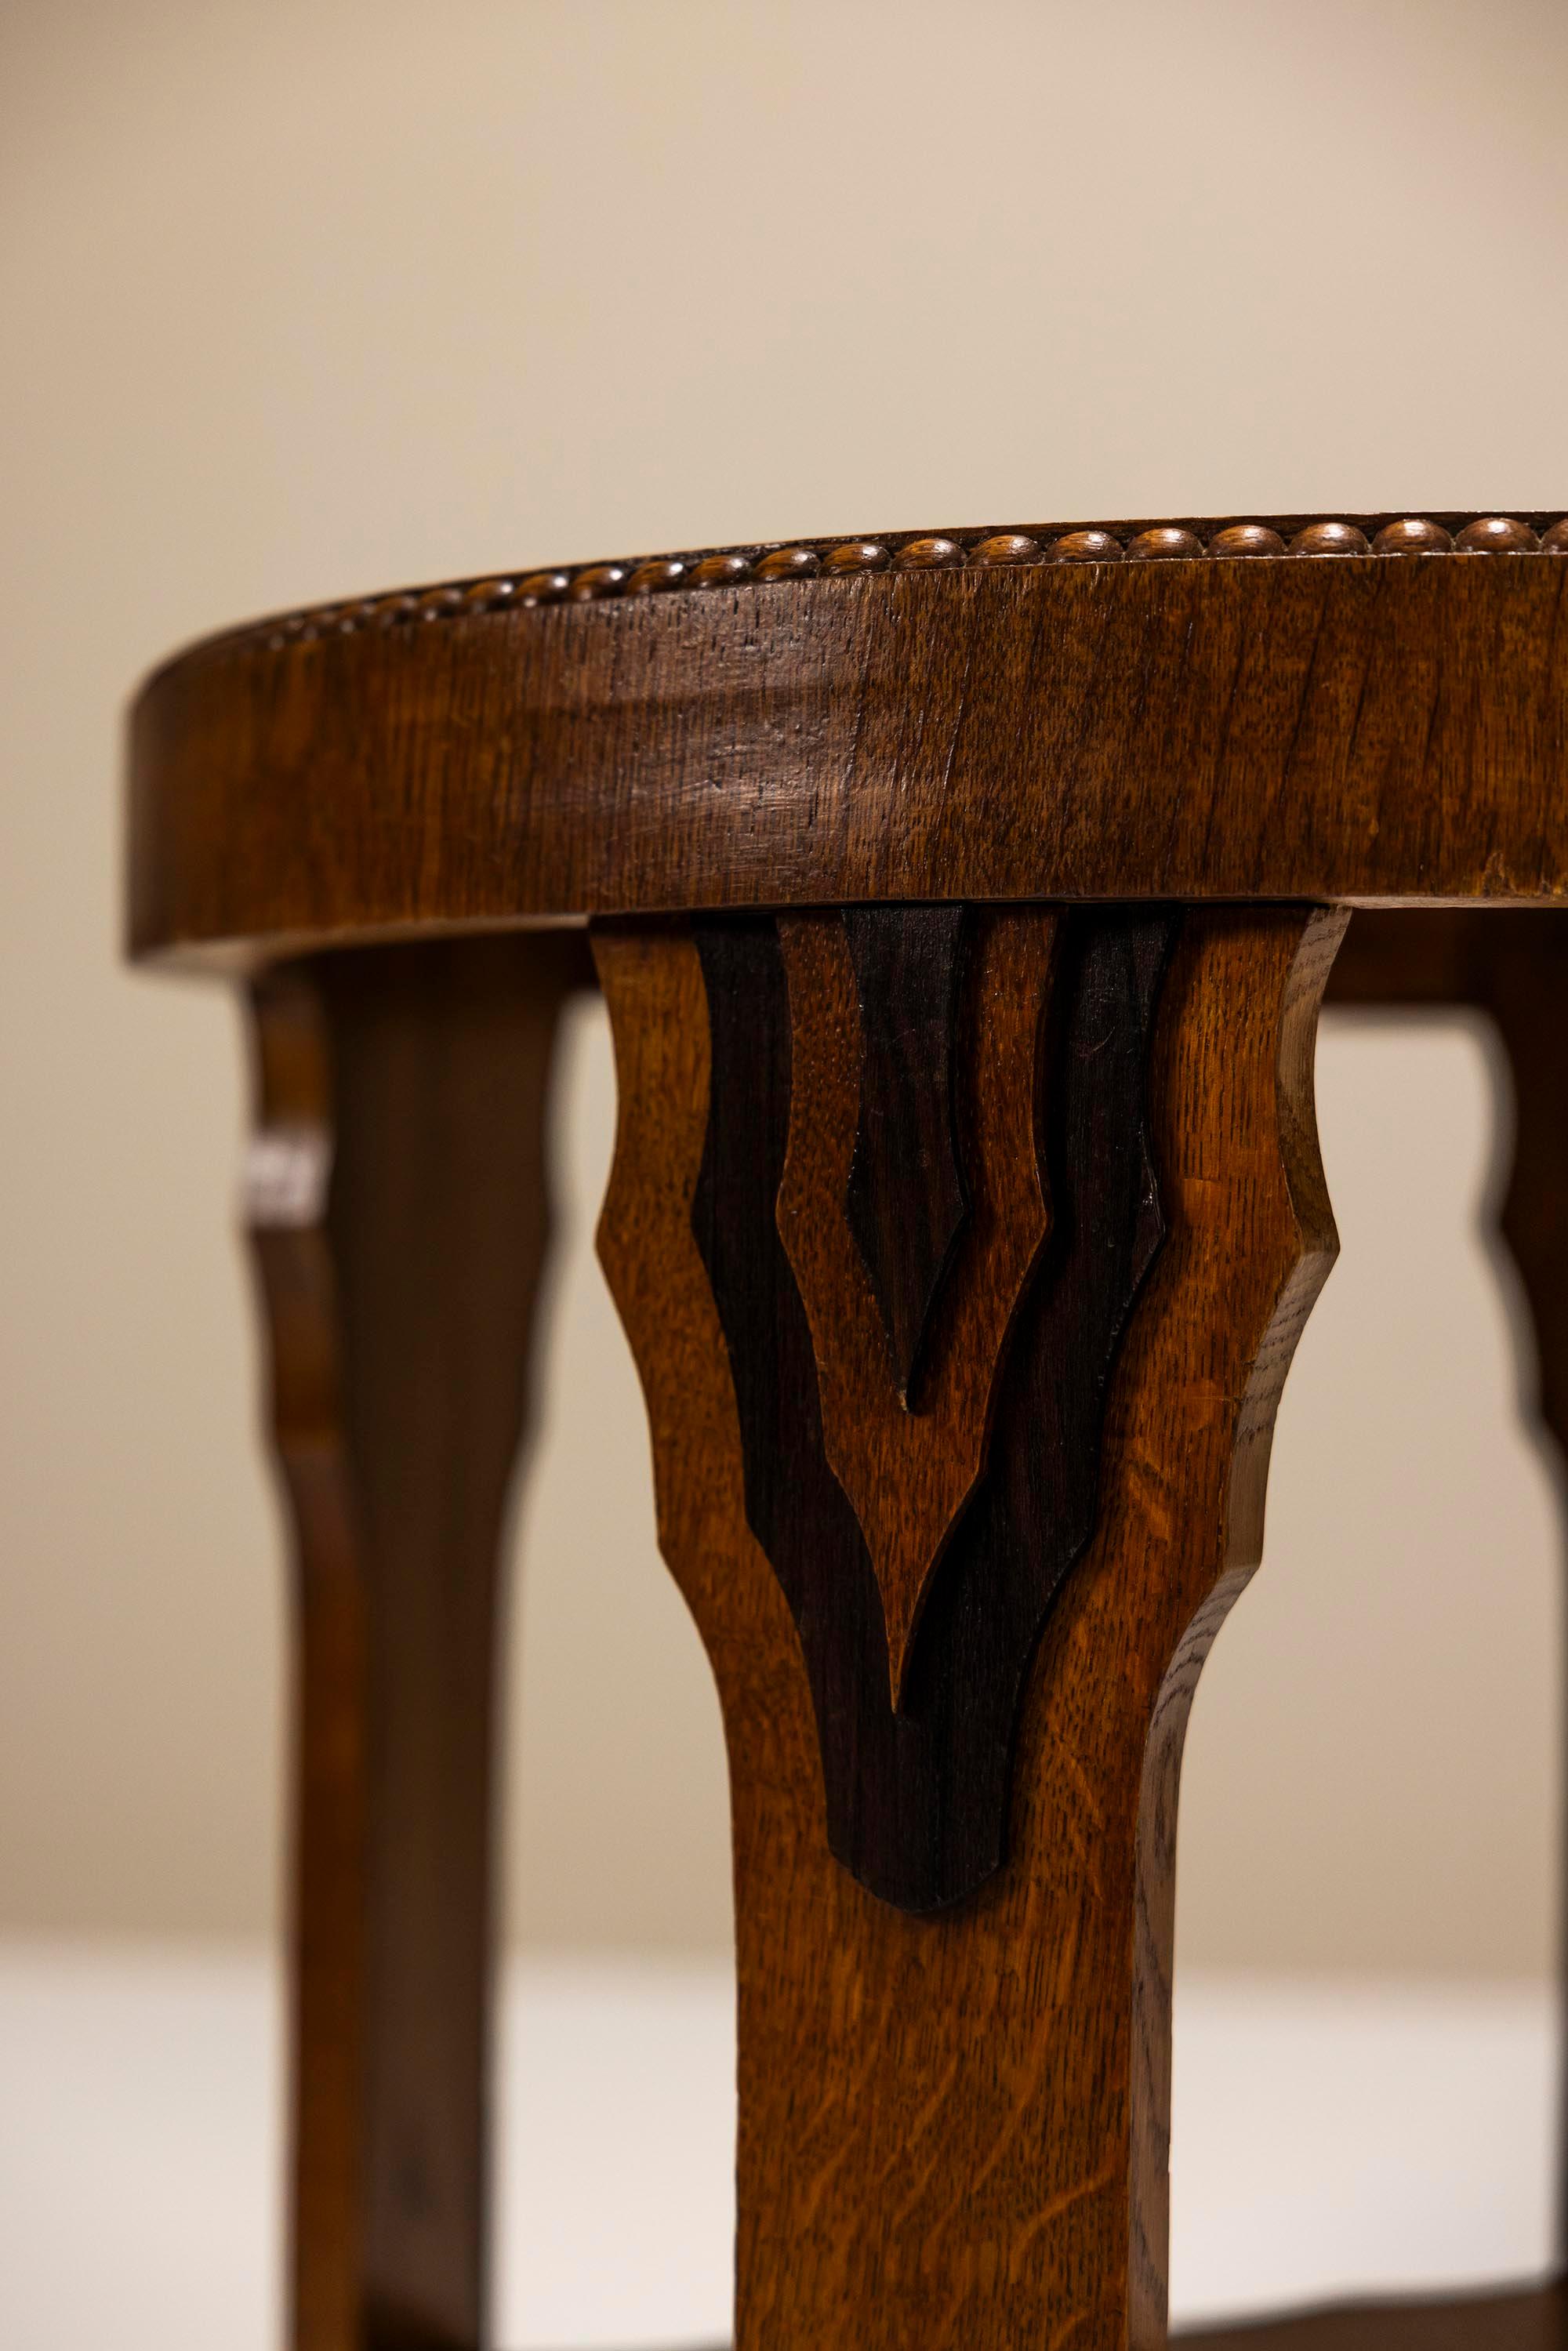 Amsterdam School Round Side Table in Oak and Ebony, 1930s For Sale 3